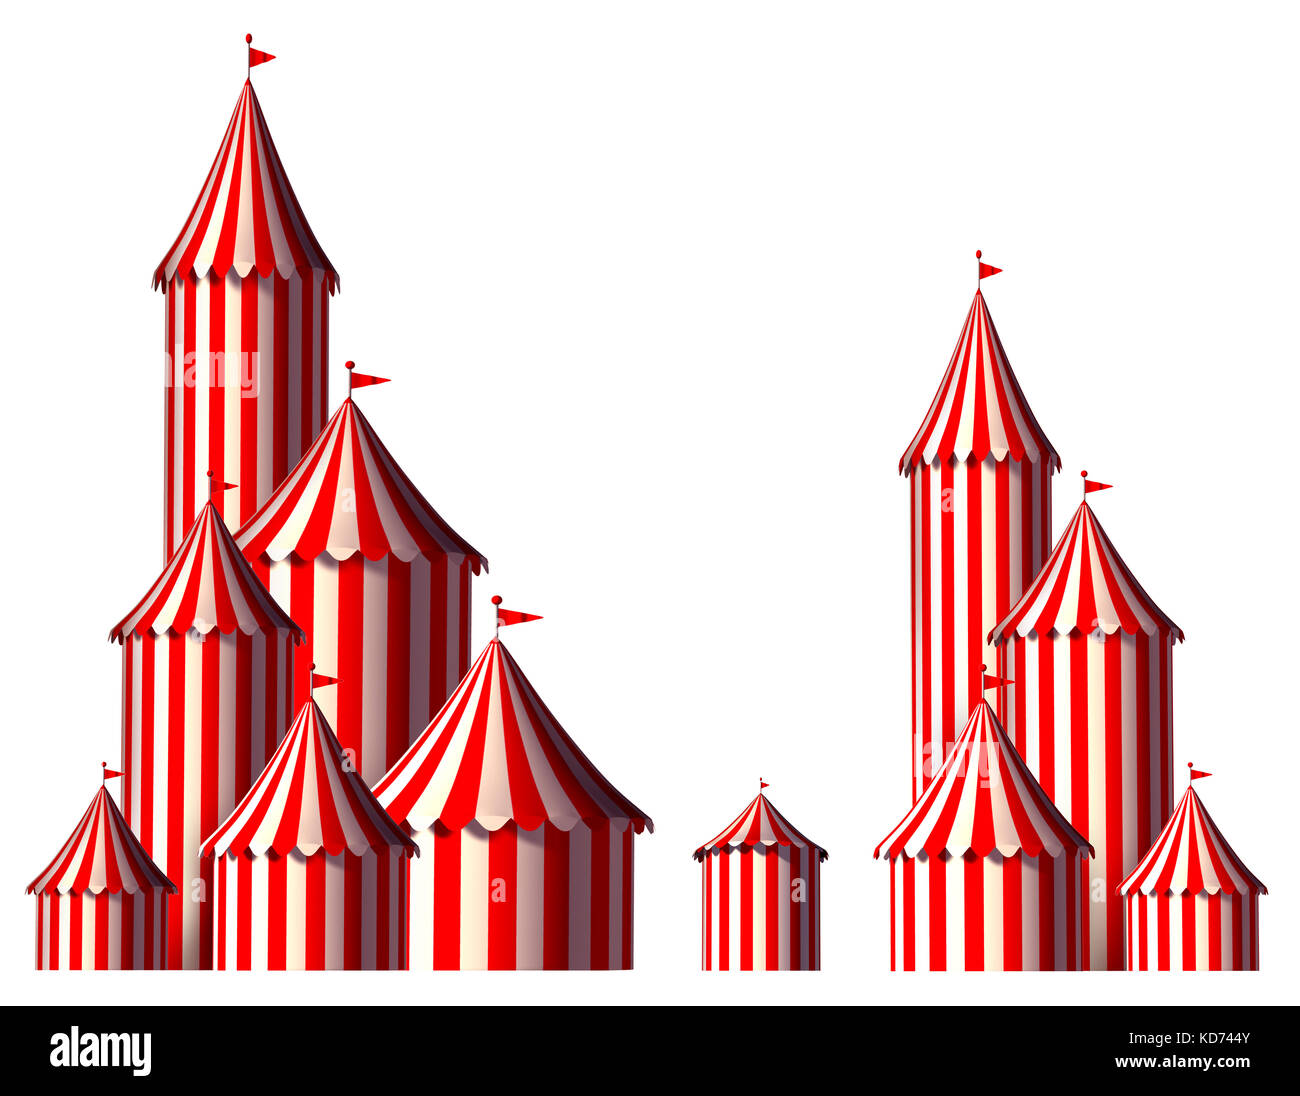 Circus tent design element as a group of big top carnival tents with an opening entrance as a fun entertainment icon for a theatrical celebration. Stock Photo